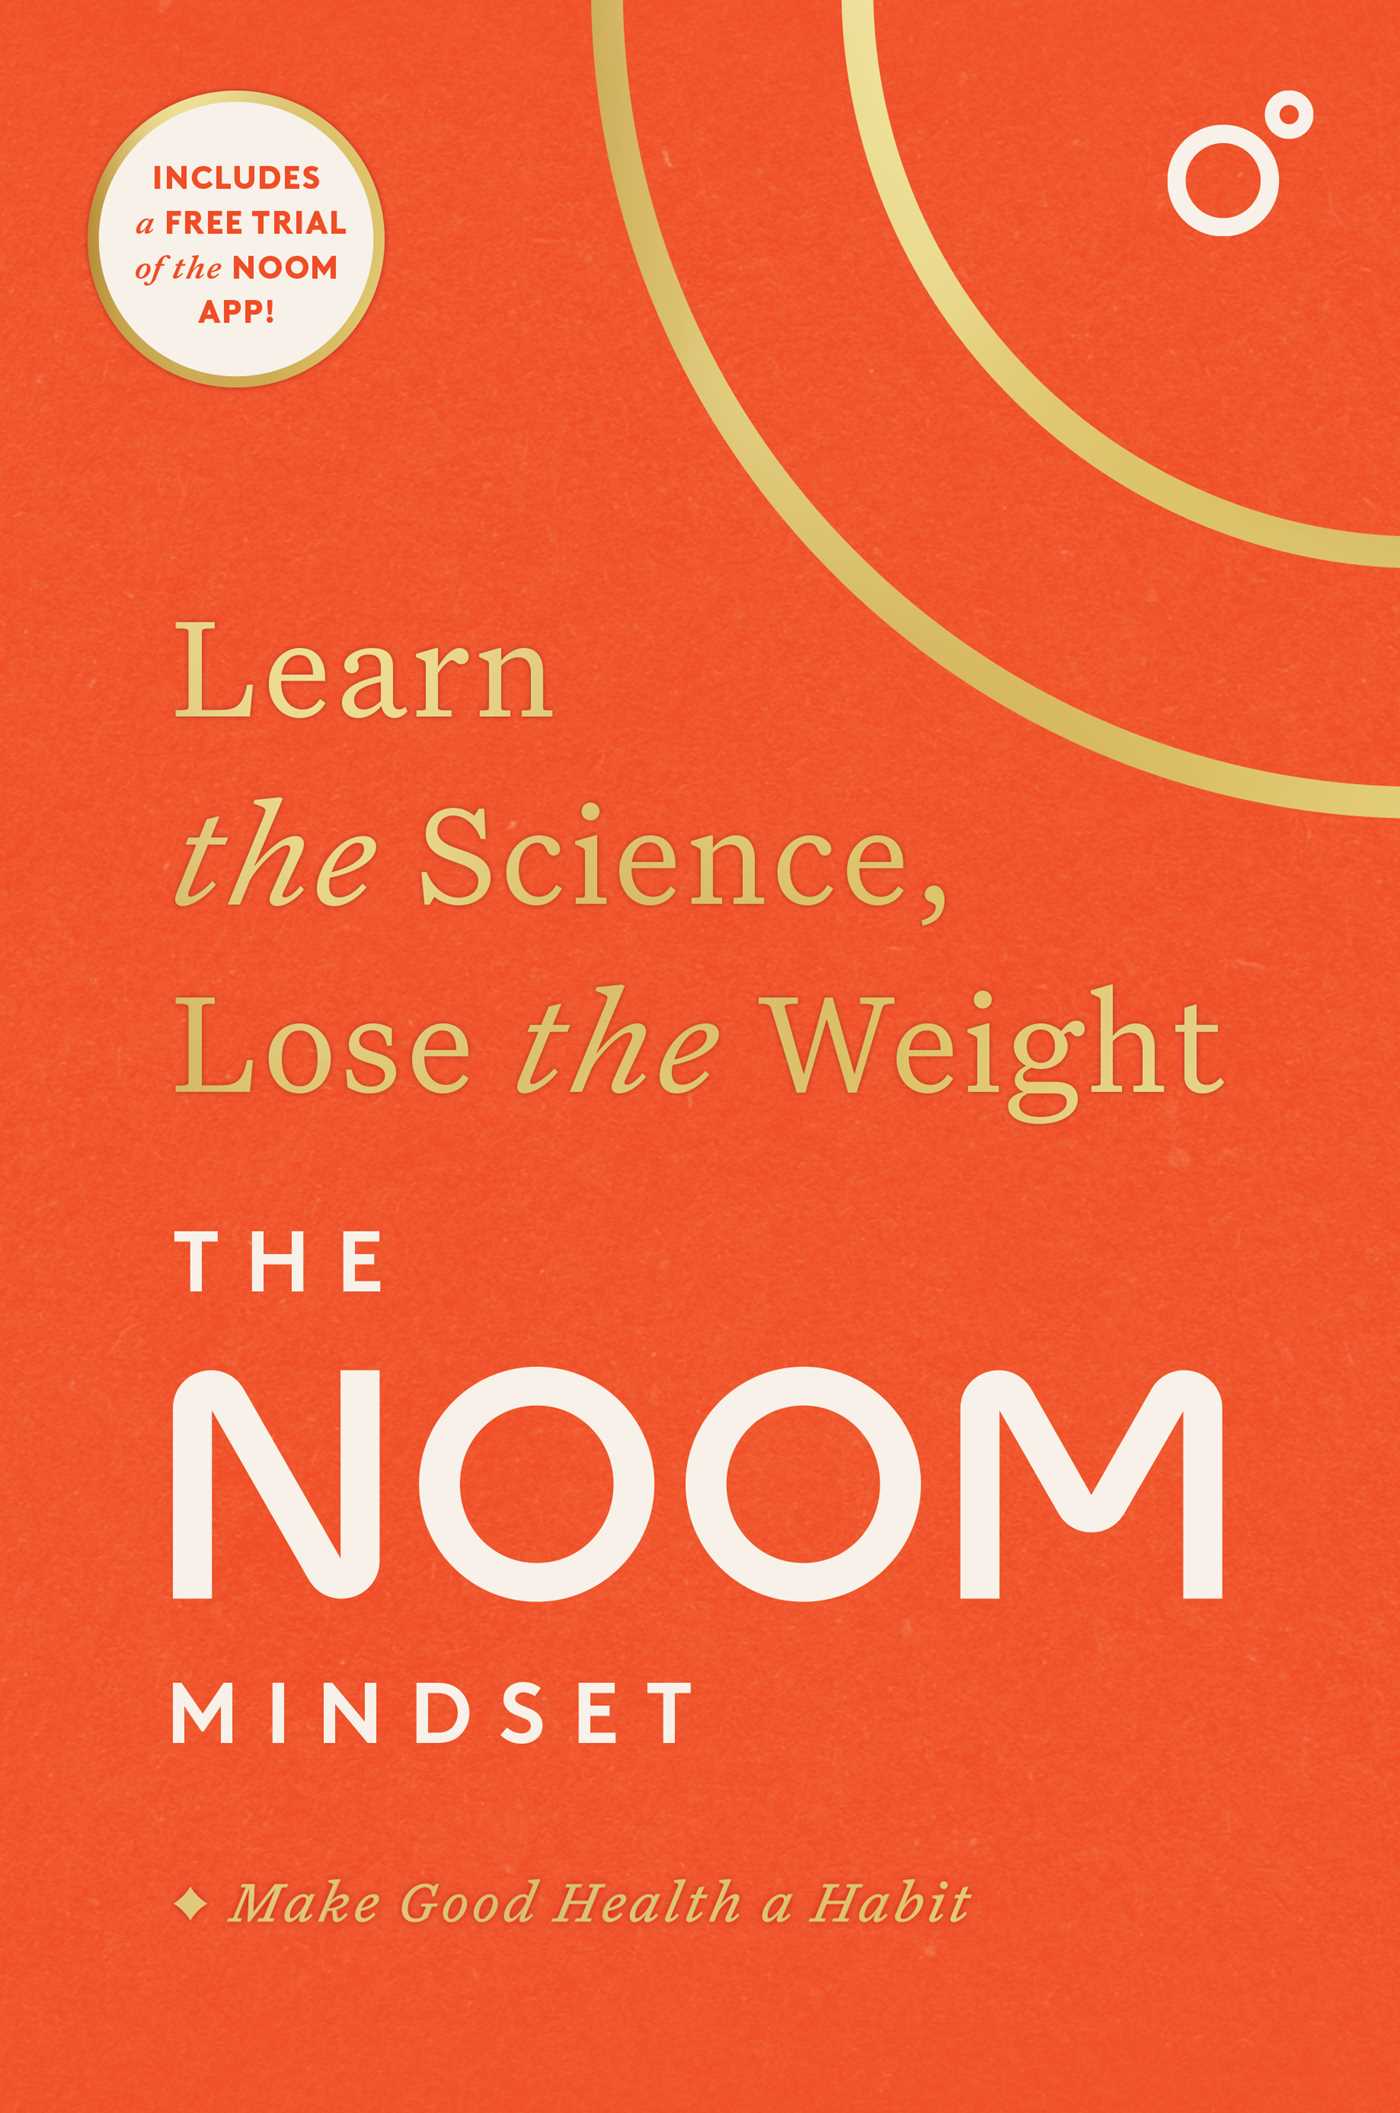 The Noom Mindset Learn the Science, Lose the Weight cover image